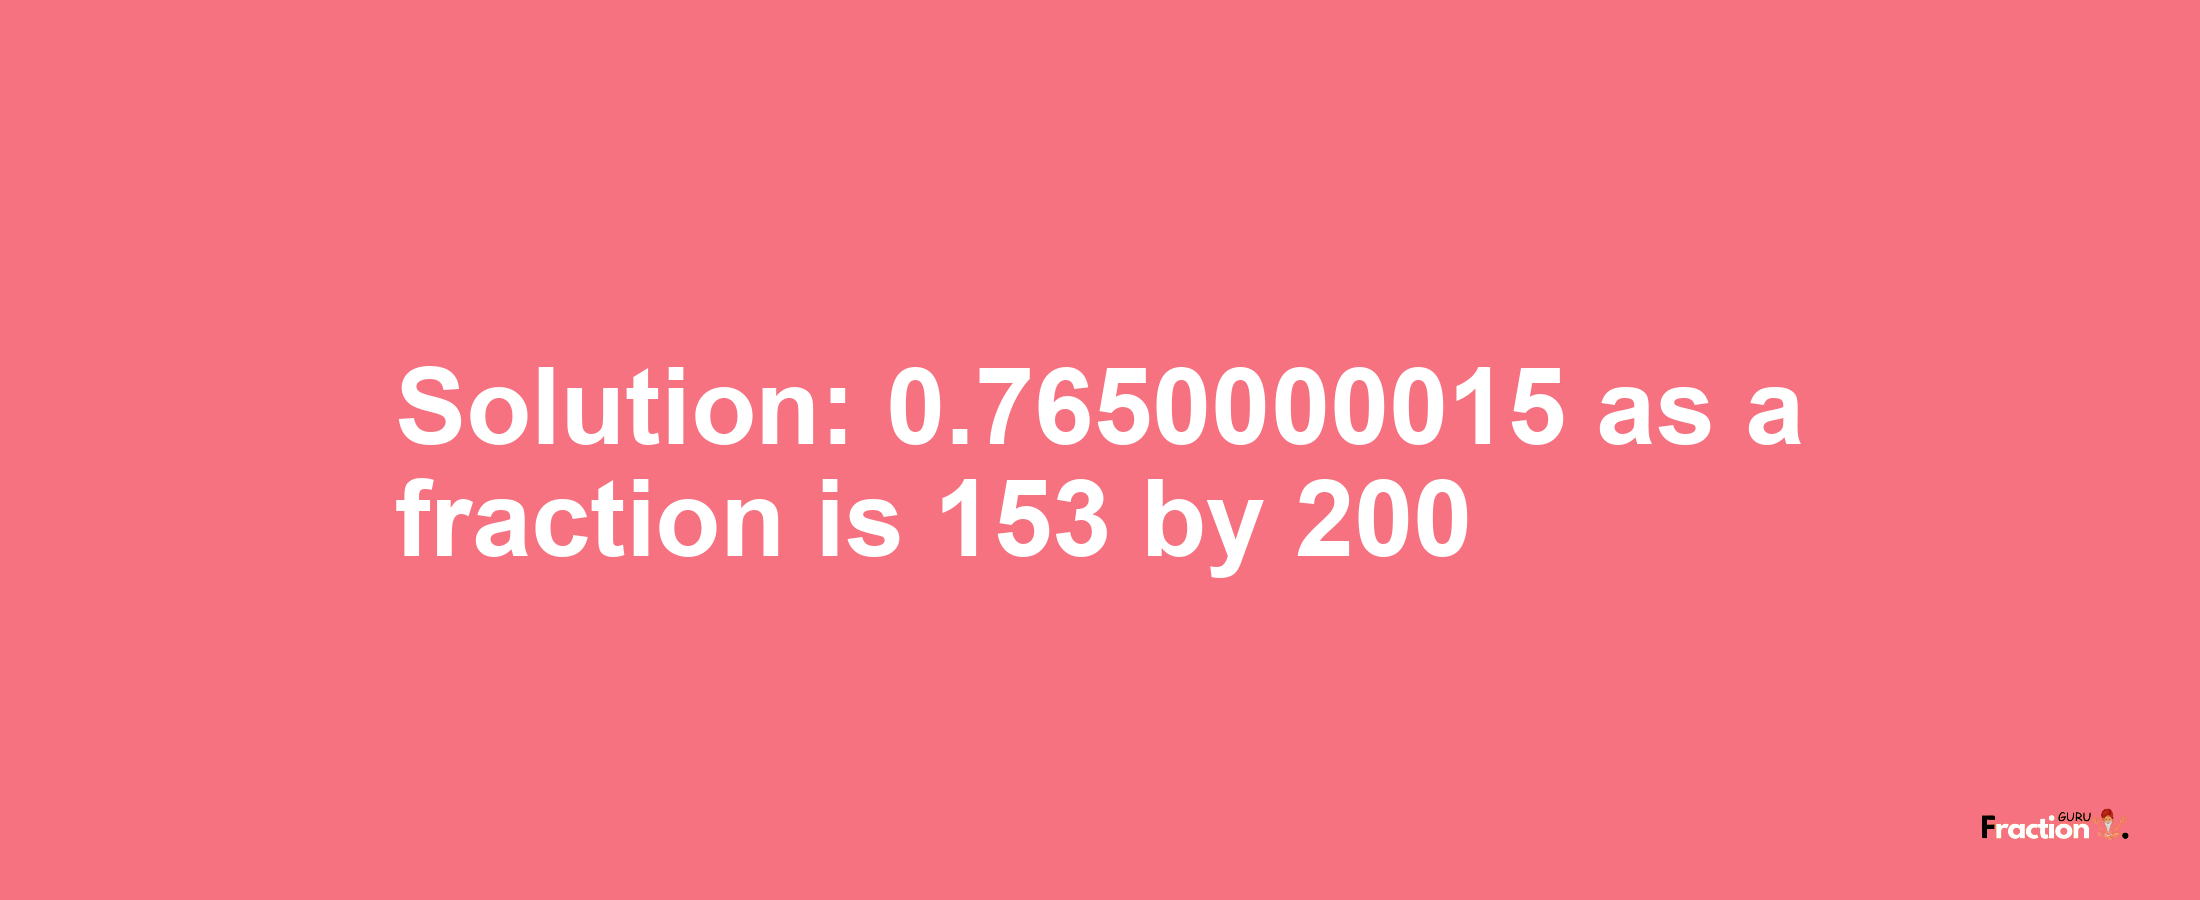 Solution:0.7650000015 as a fraction is 153/200